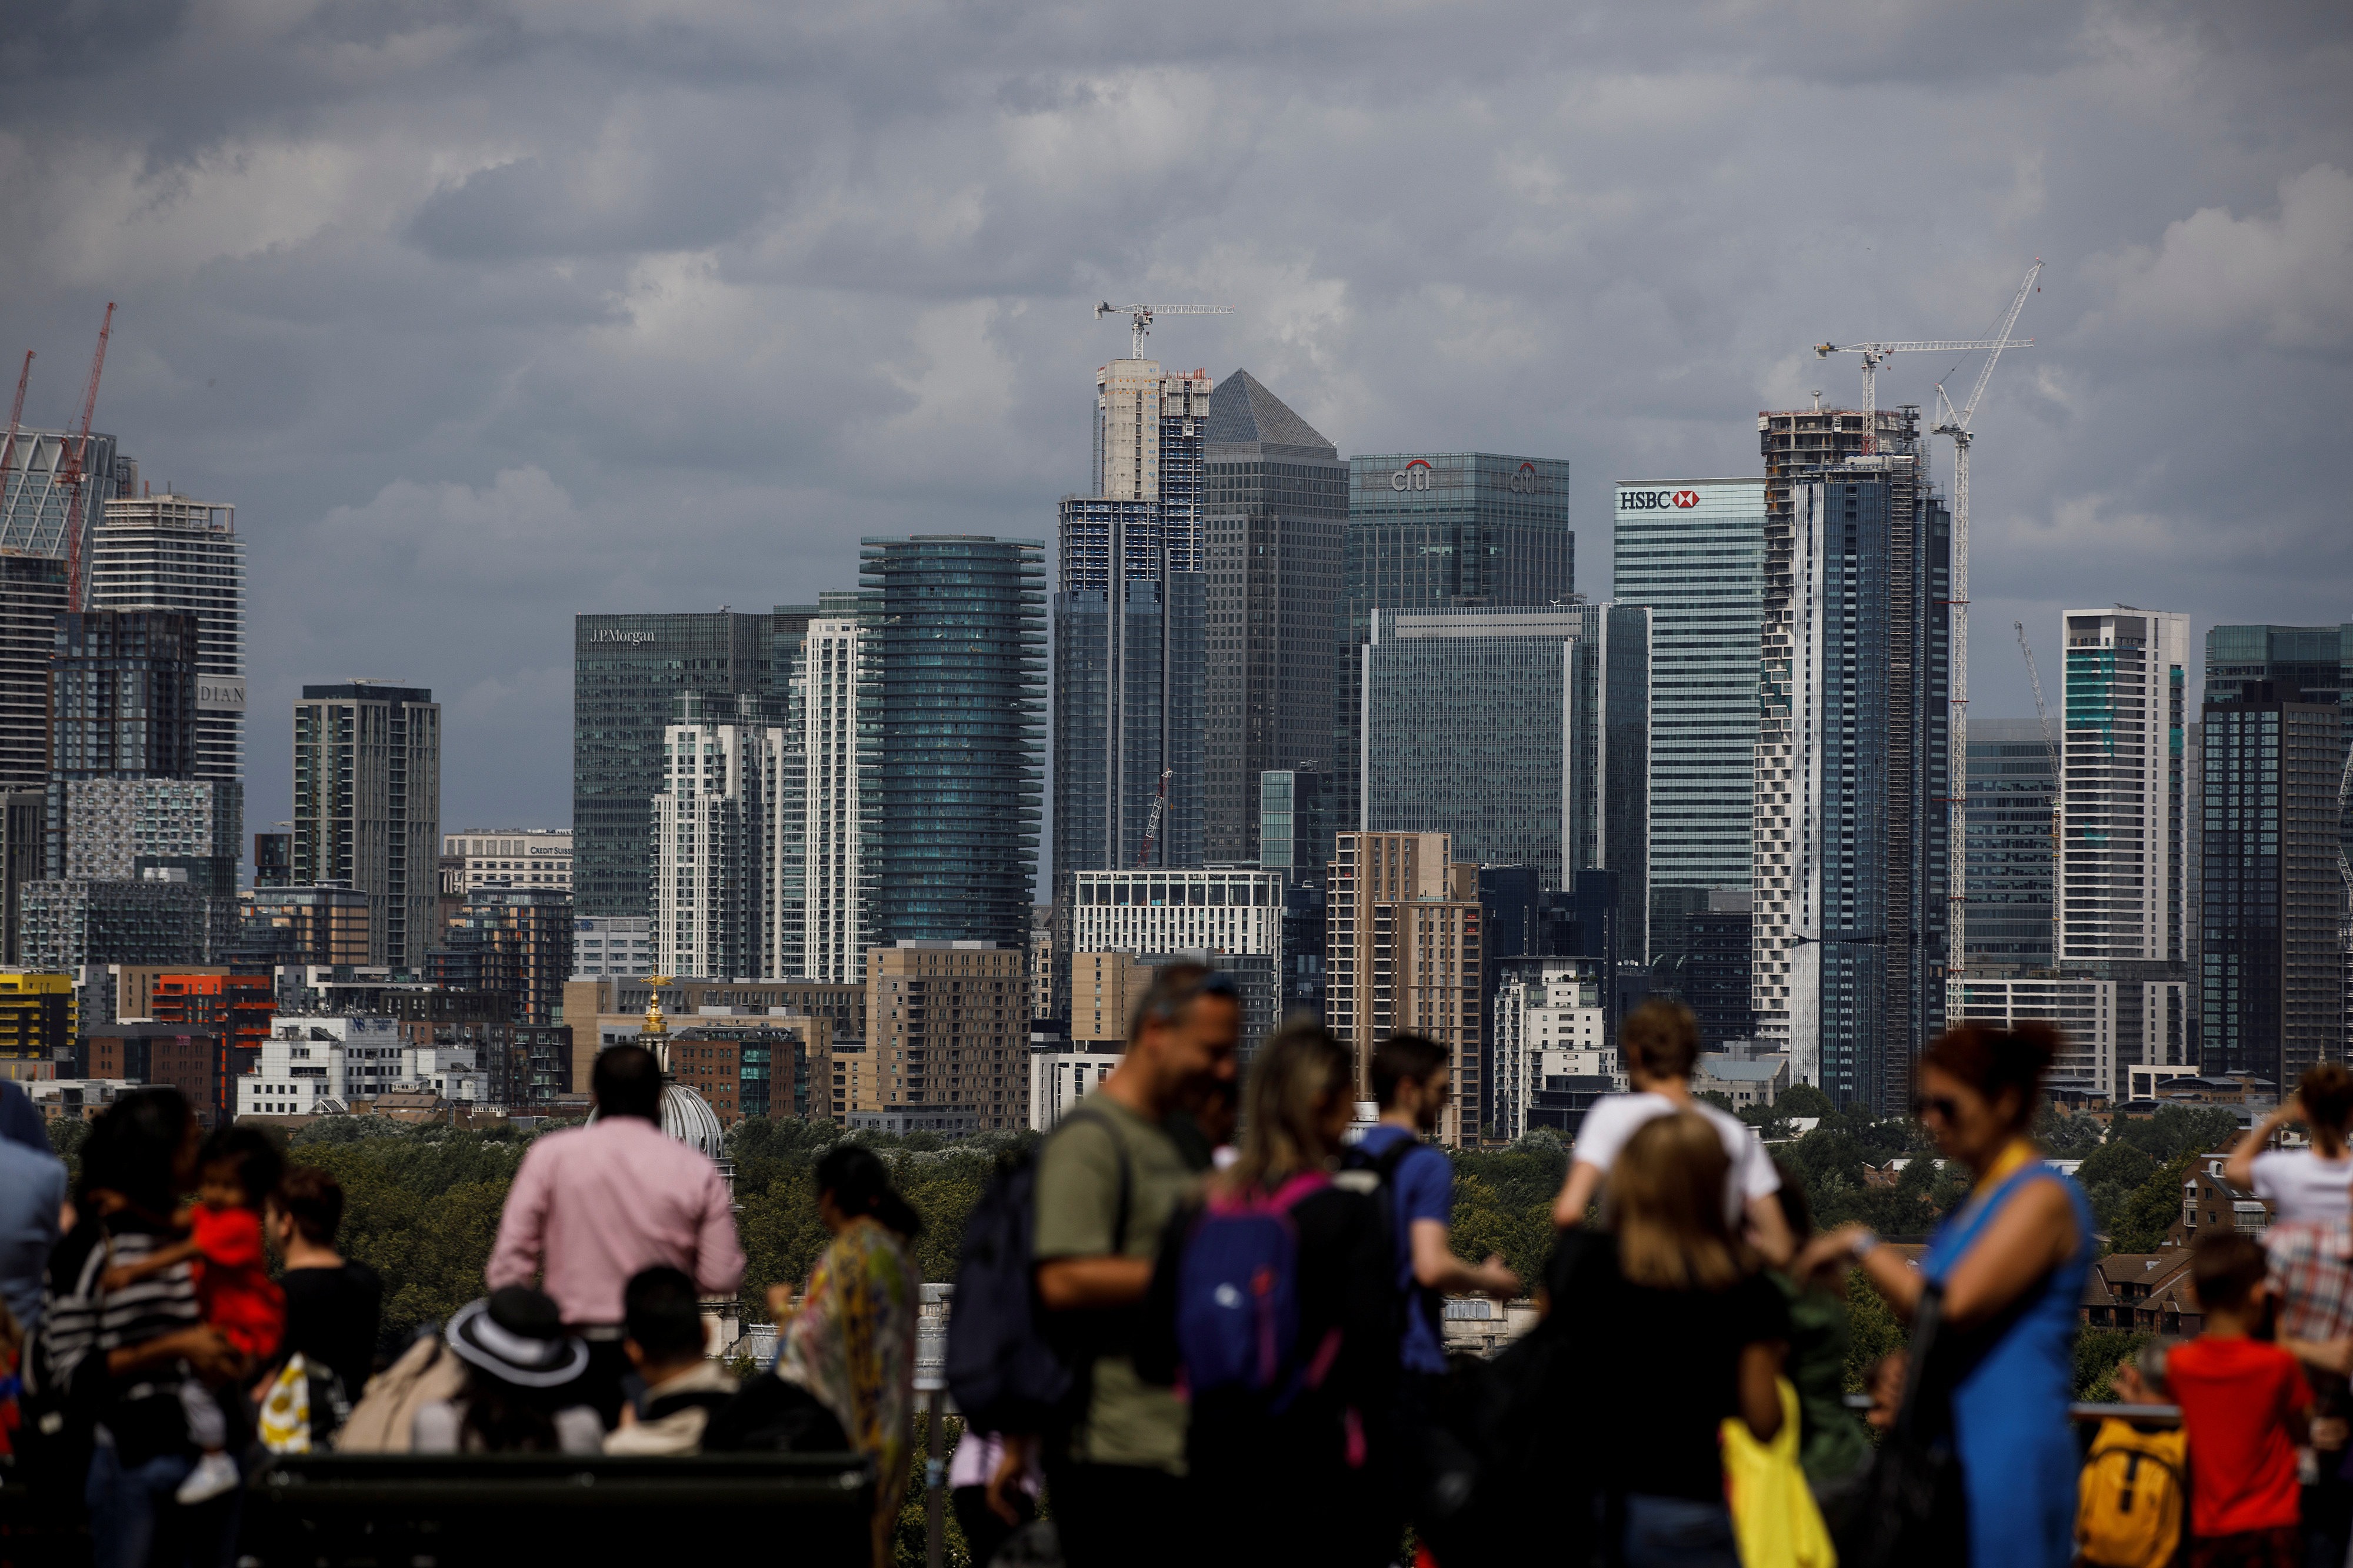 People look out onto the Canary Wharf financial district as they stand at a viewing area in Greenwich Park in London